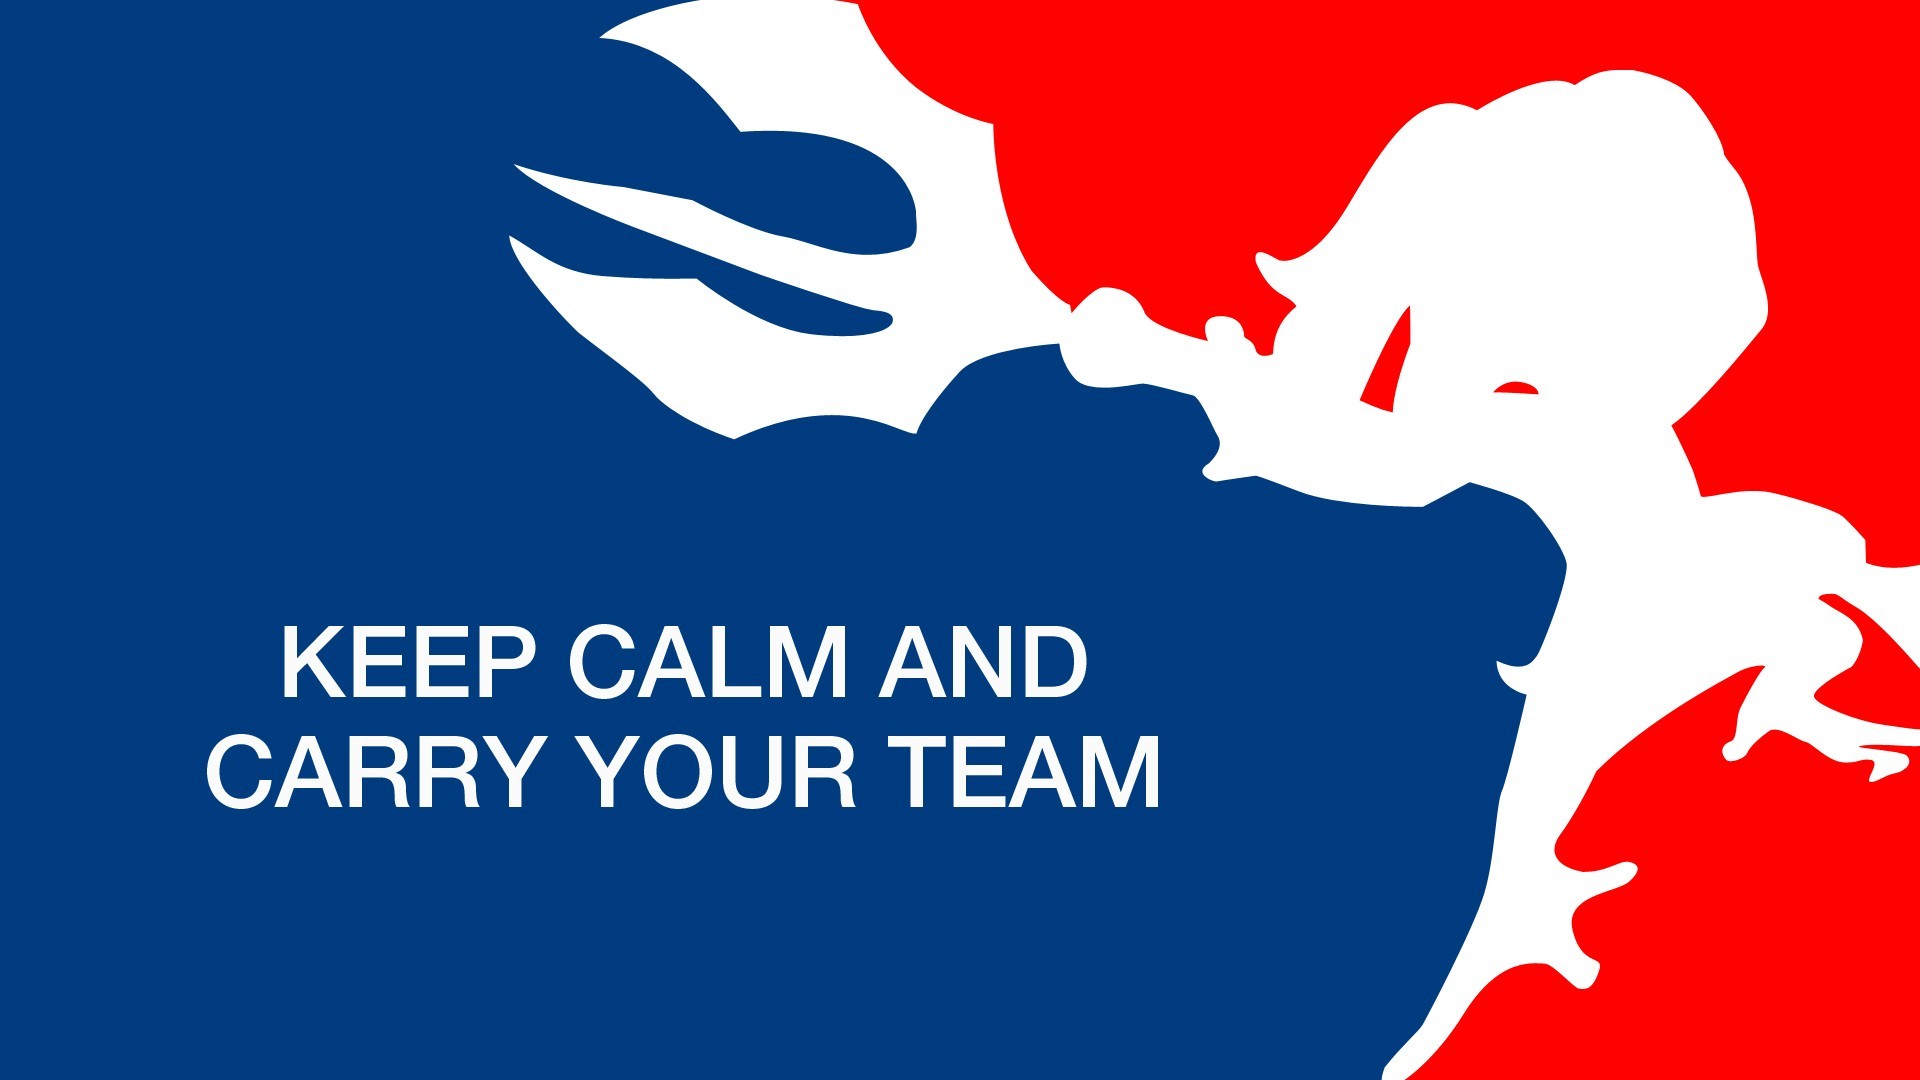 General 1920x1080 video games Keep Calm and... League of Legends text typography PC gaming video game art